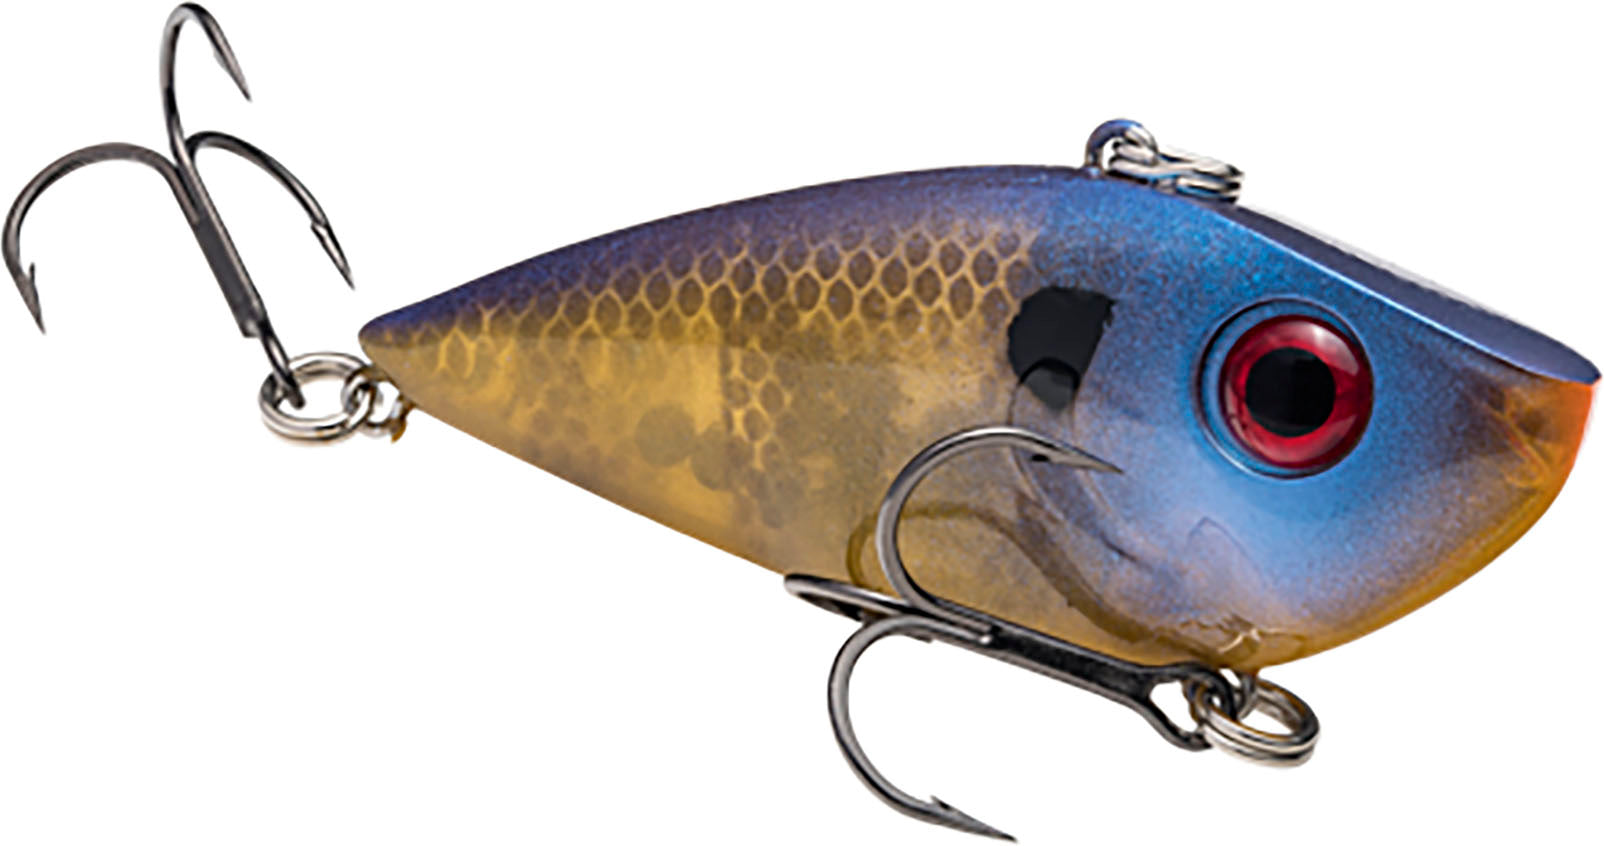 Strike King Red Eyed Shad Lipless Crankbait - 2.25 Inch — Discount